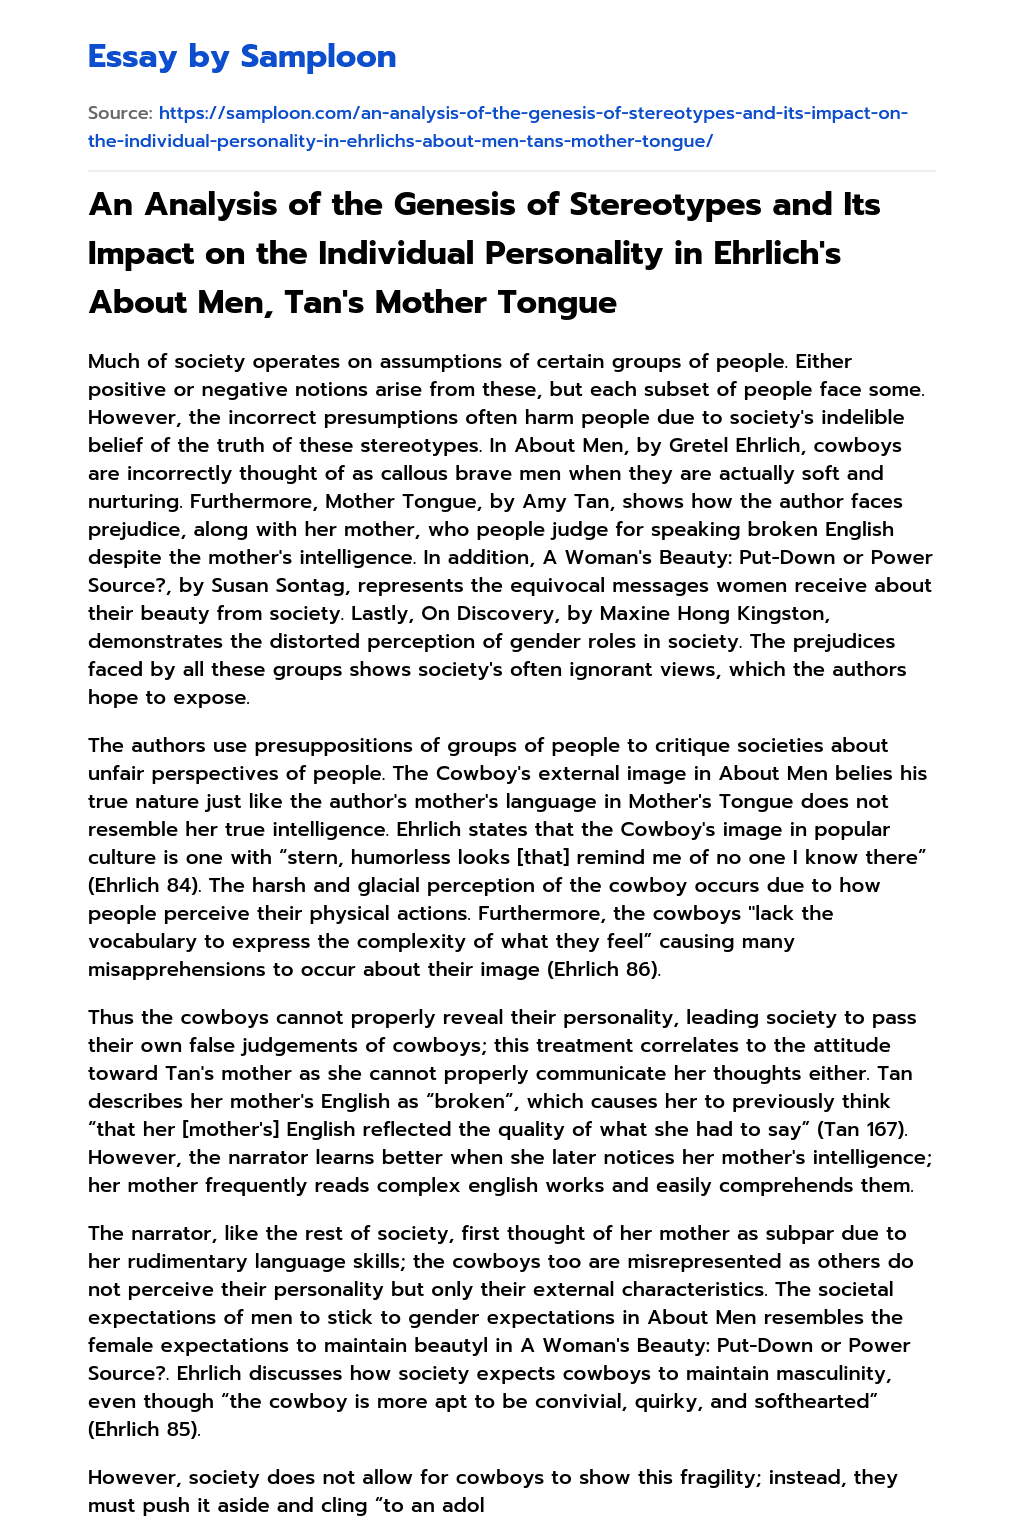 An Analysis of the Genesis of Stereotypes and Its Impact on the Individual Personality in Ehrlich’s About Men, Tan’s Mother Tongue essay